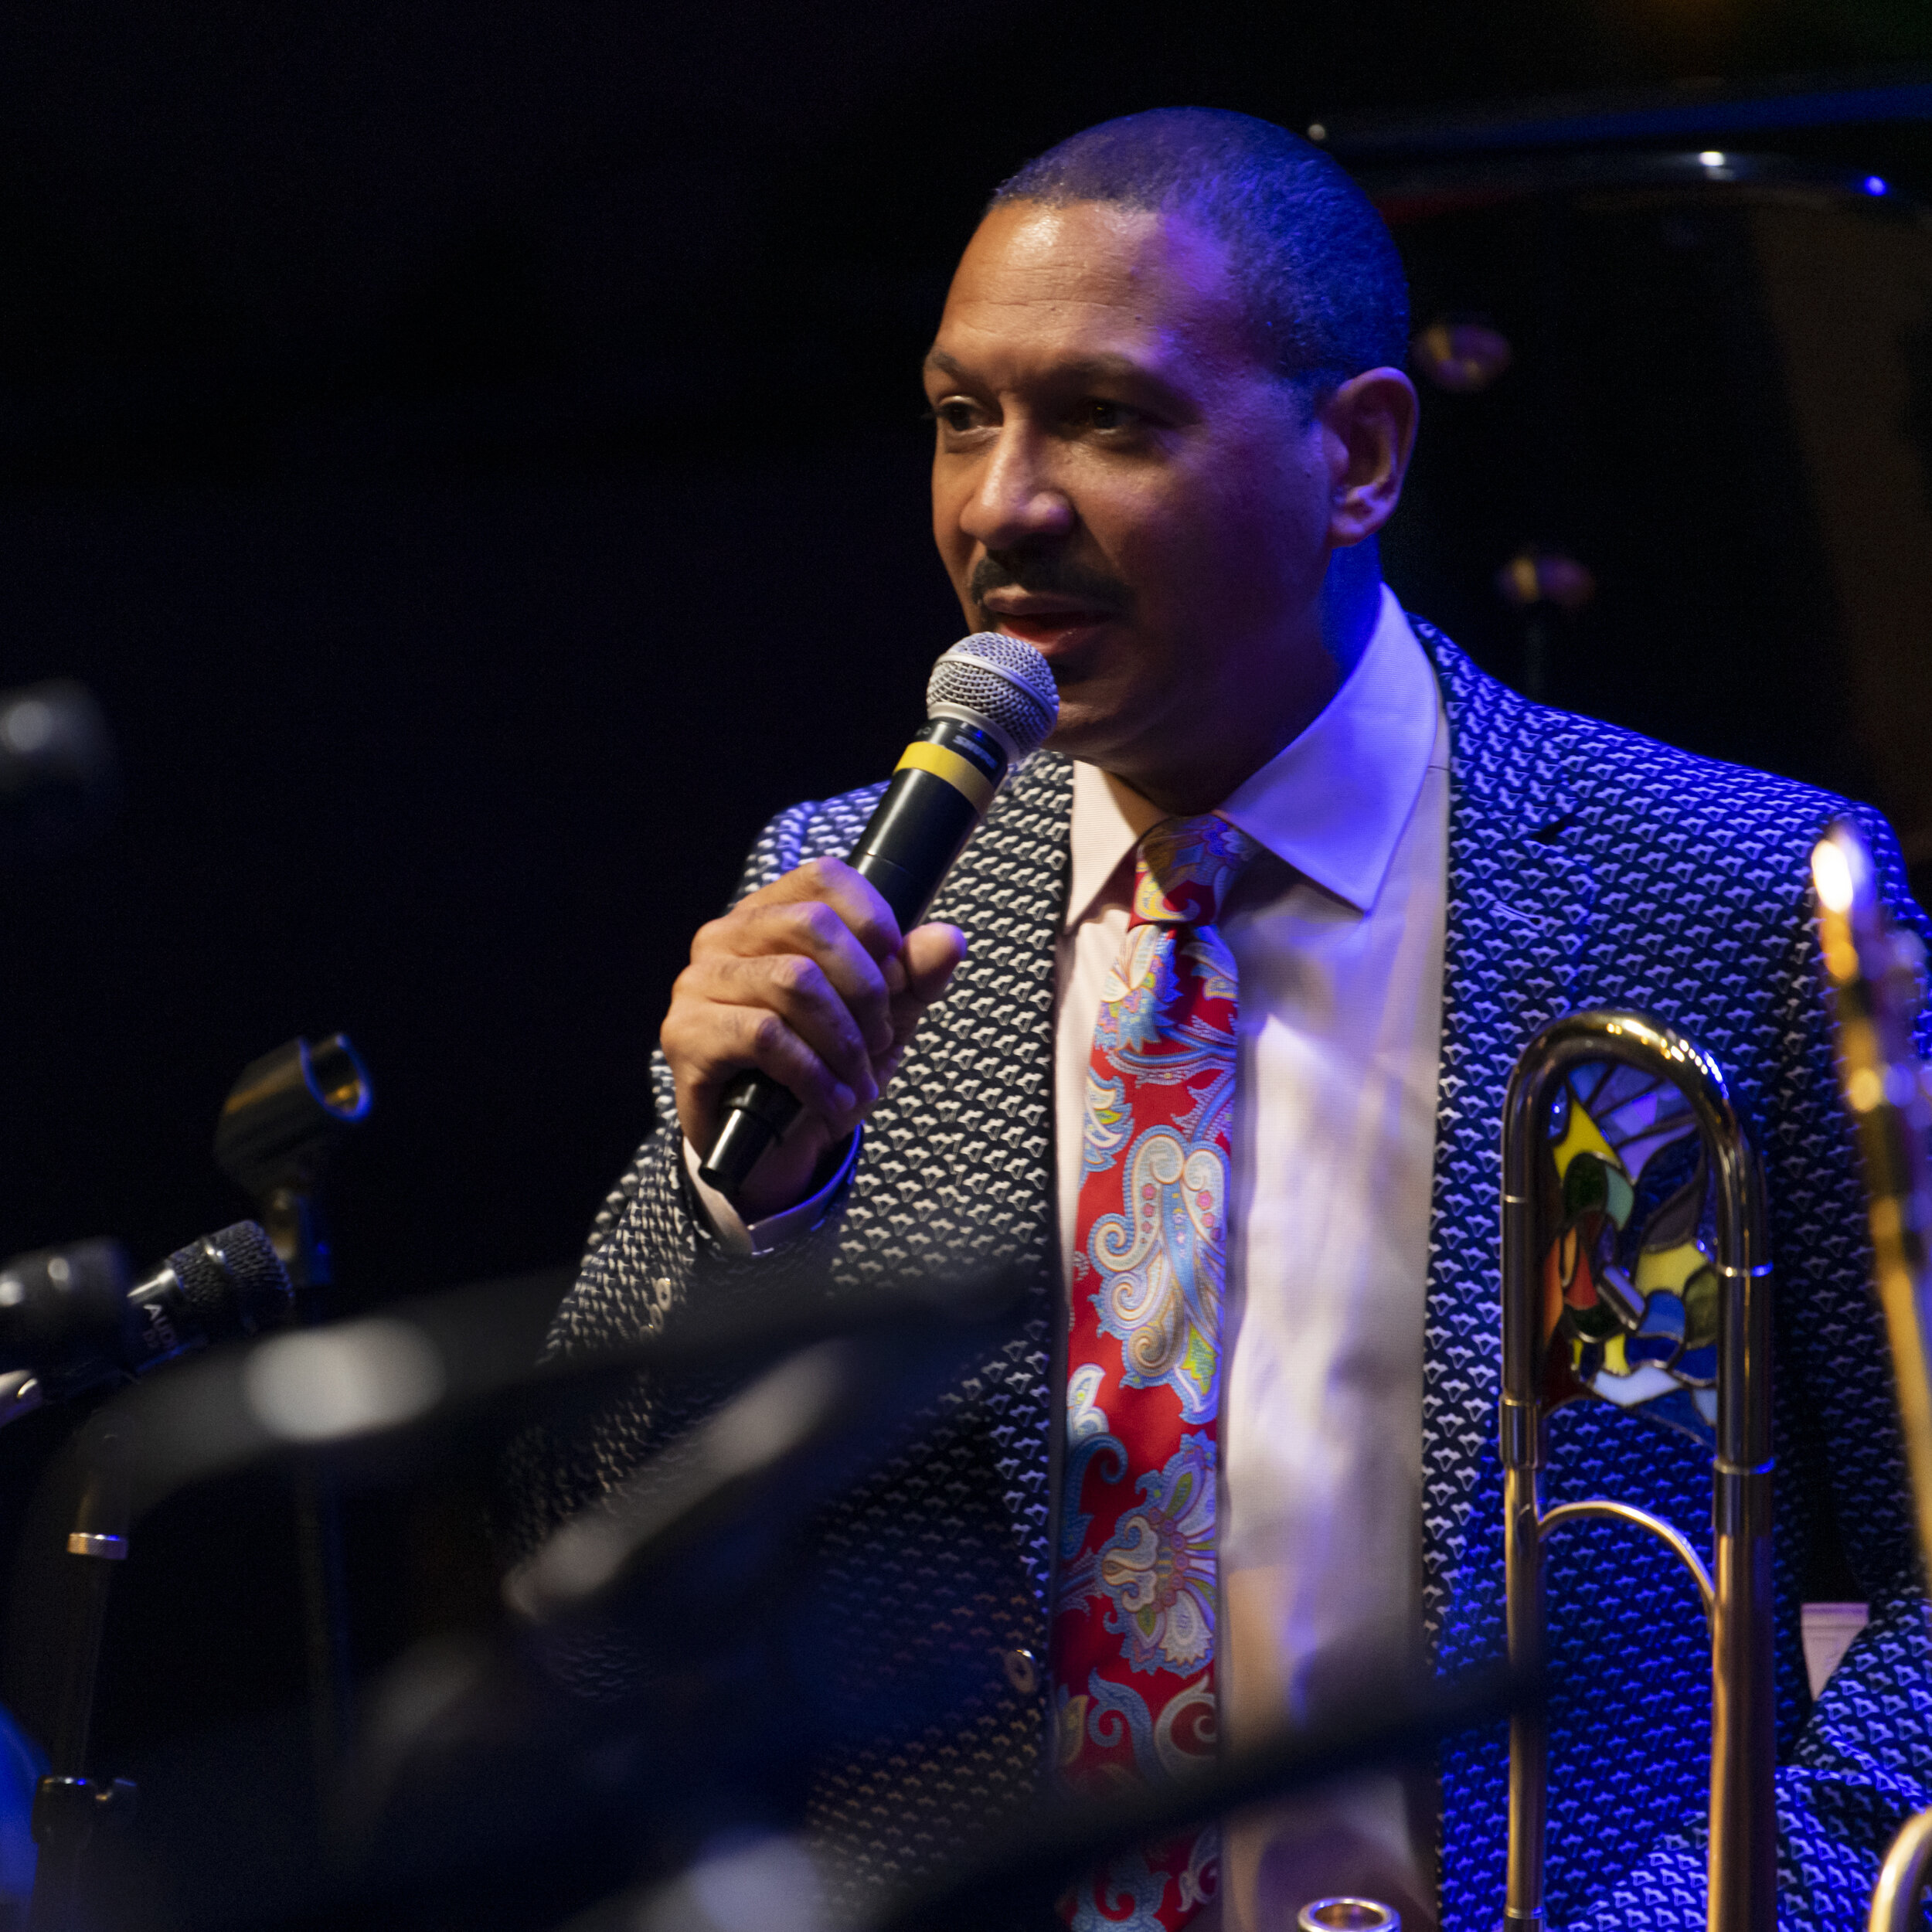  Delfeayo Marsalis &amp; the Uptown Jazz Orchestra at the Park Theatre  Friday October 18, 2019  Photo by Keith Levit 